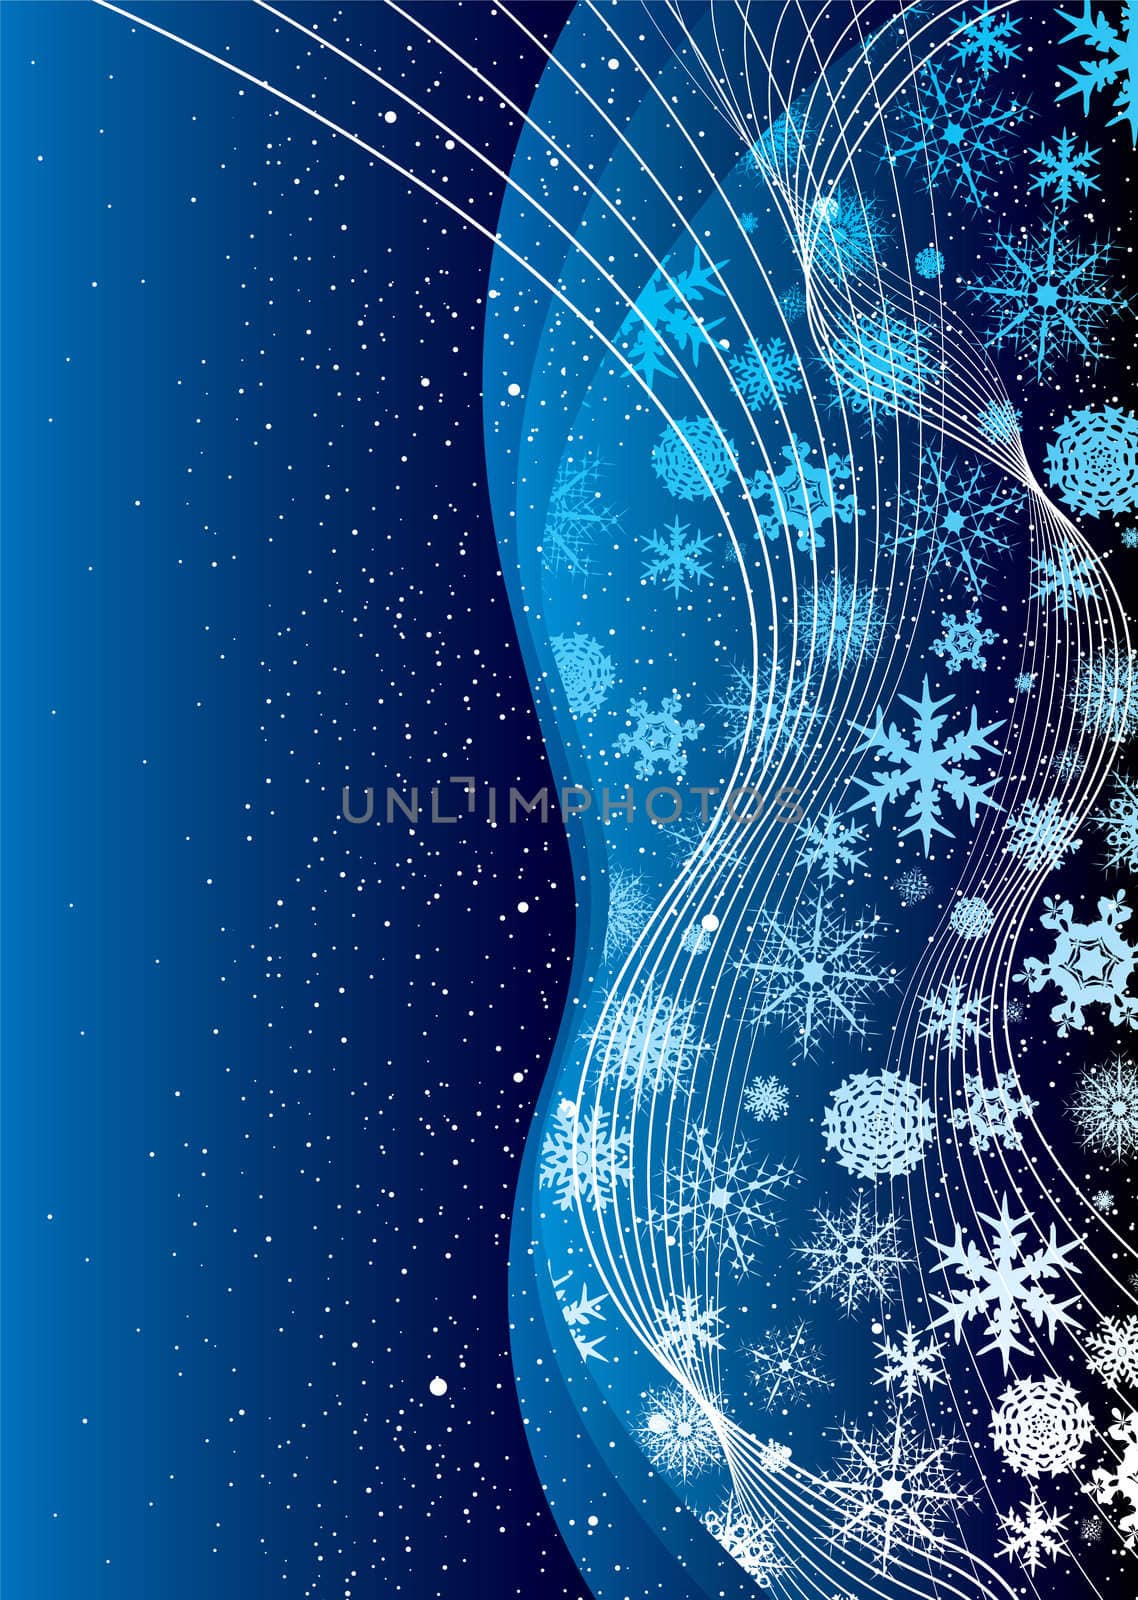 shades of blue abstract christmas background with snow flakes